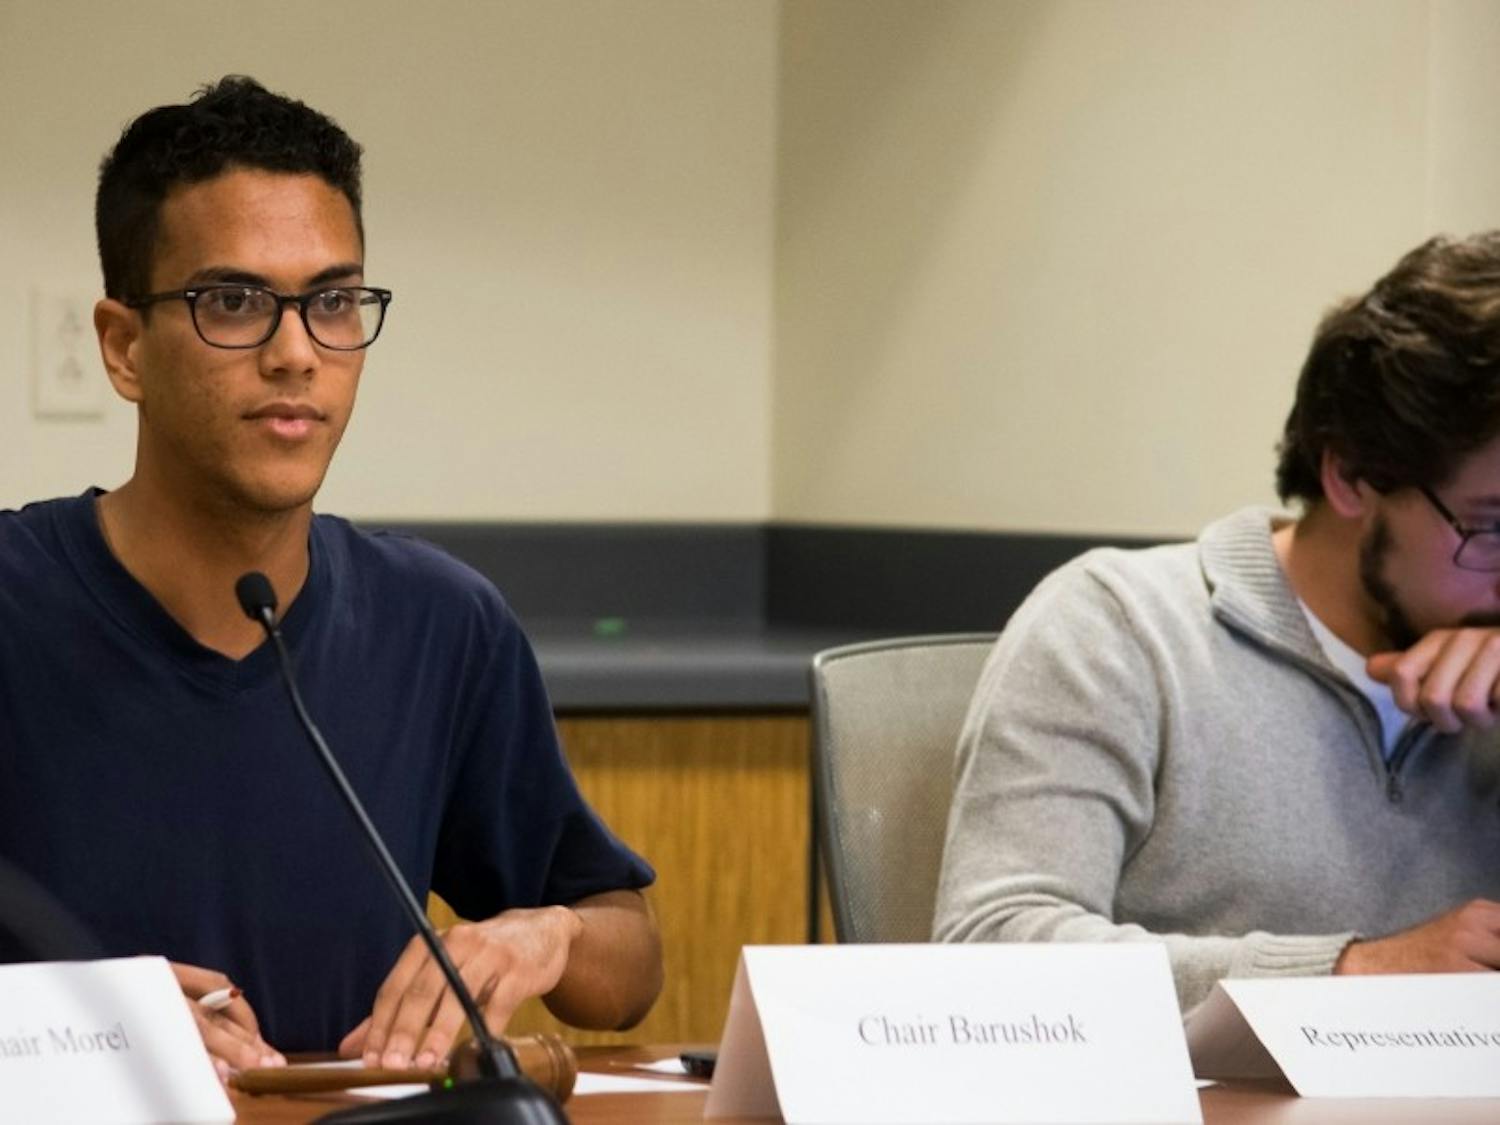 The&nbsp;Student&nbsp;Services Finance Committee voted on legislation co-sponored&nbsp;by Chair Colin Barushok.&nbsp;